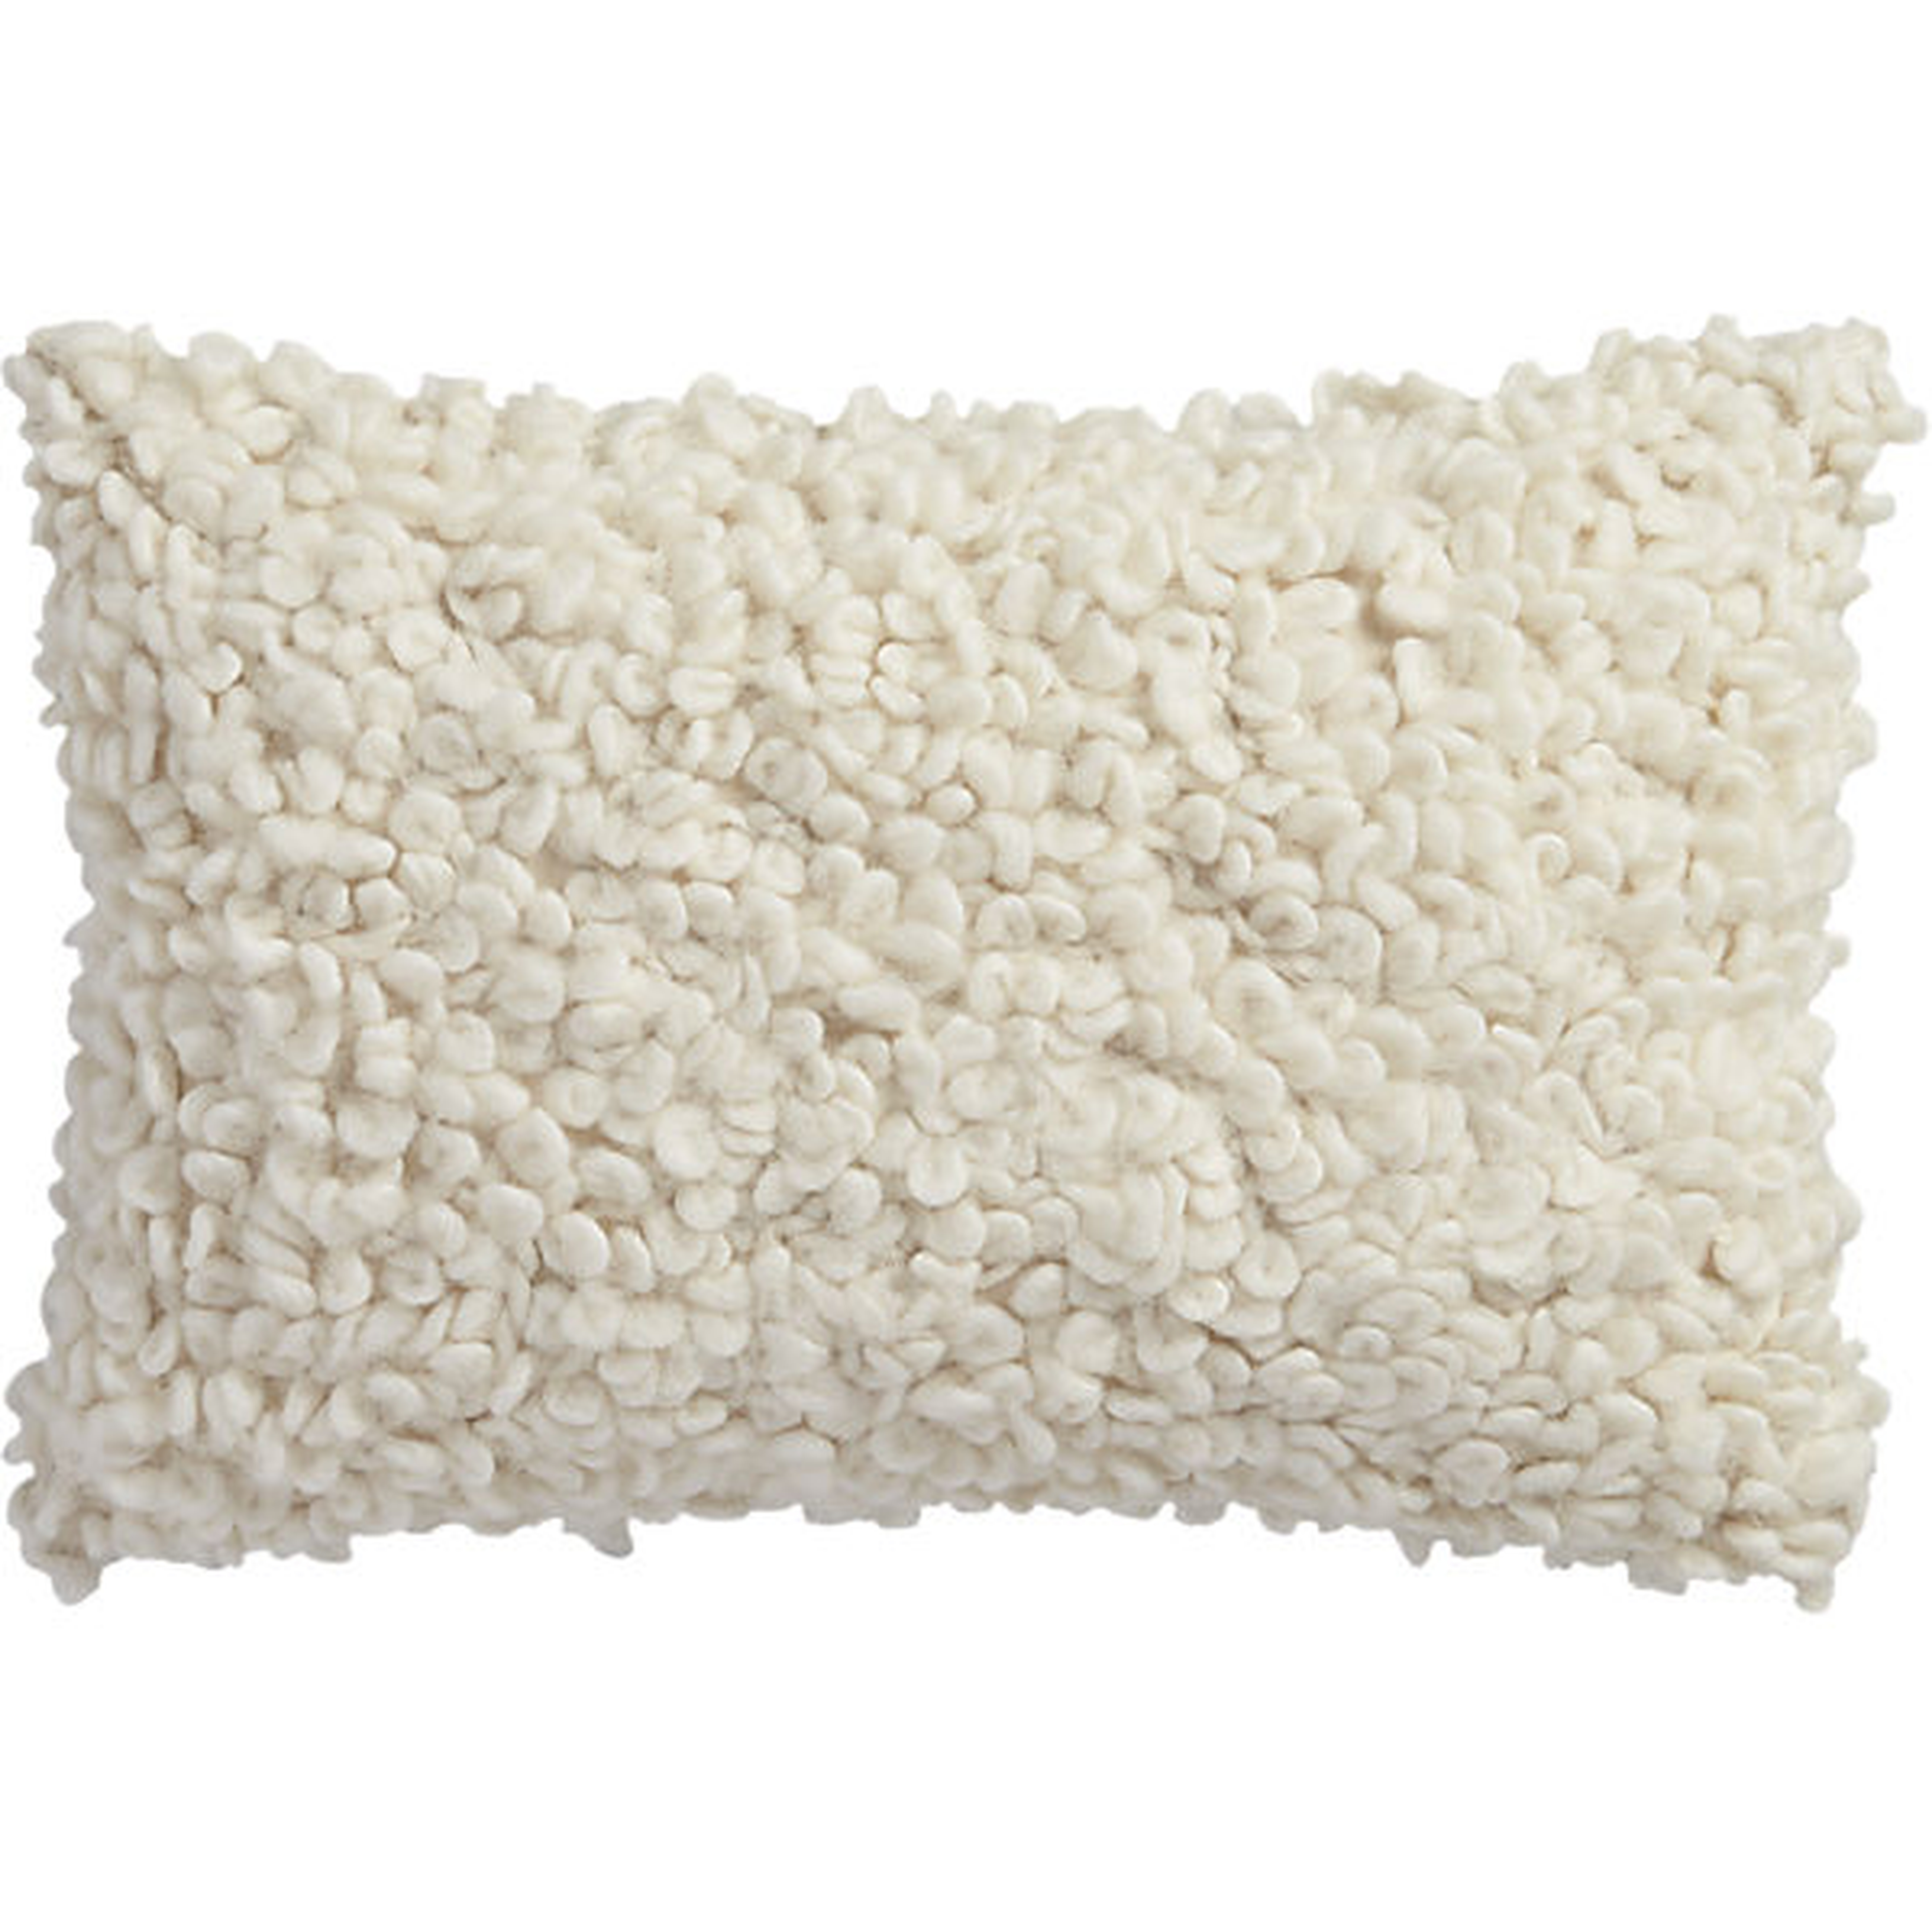 Toodle Pillow with Down-Alternative Insert, Ivory, 18" x 12" - CB2